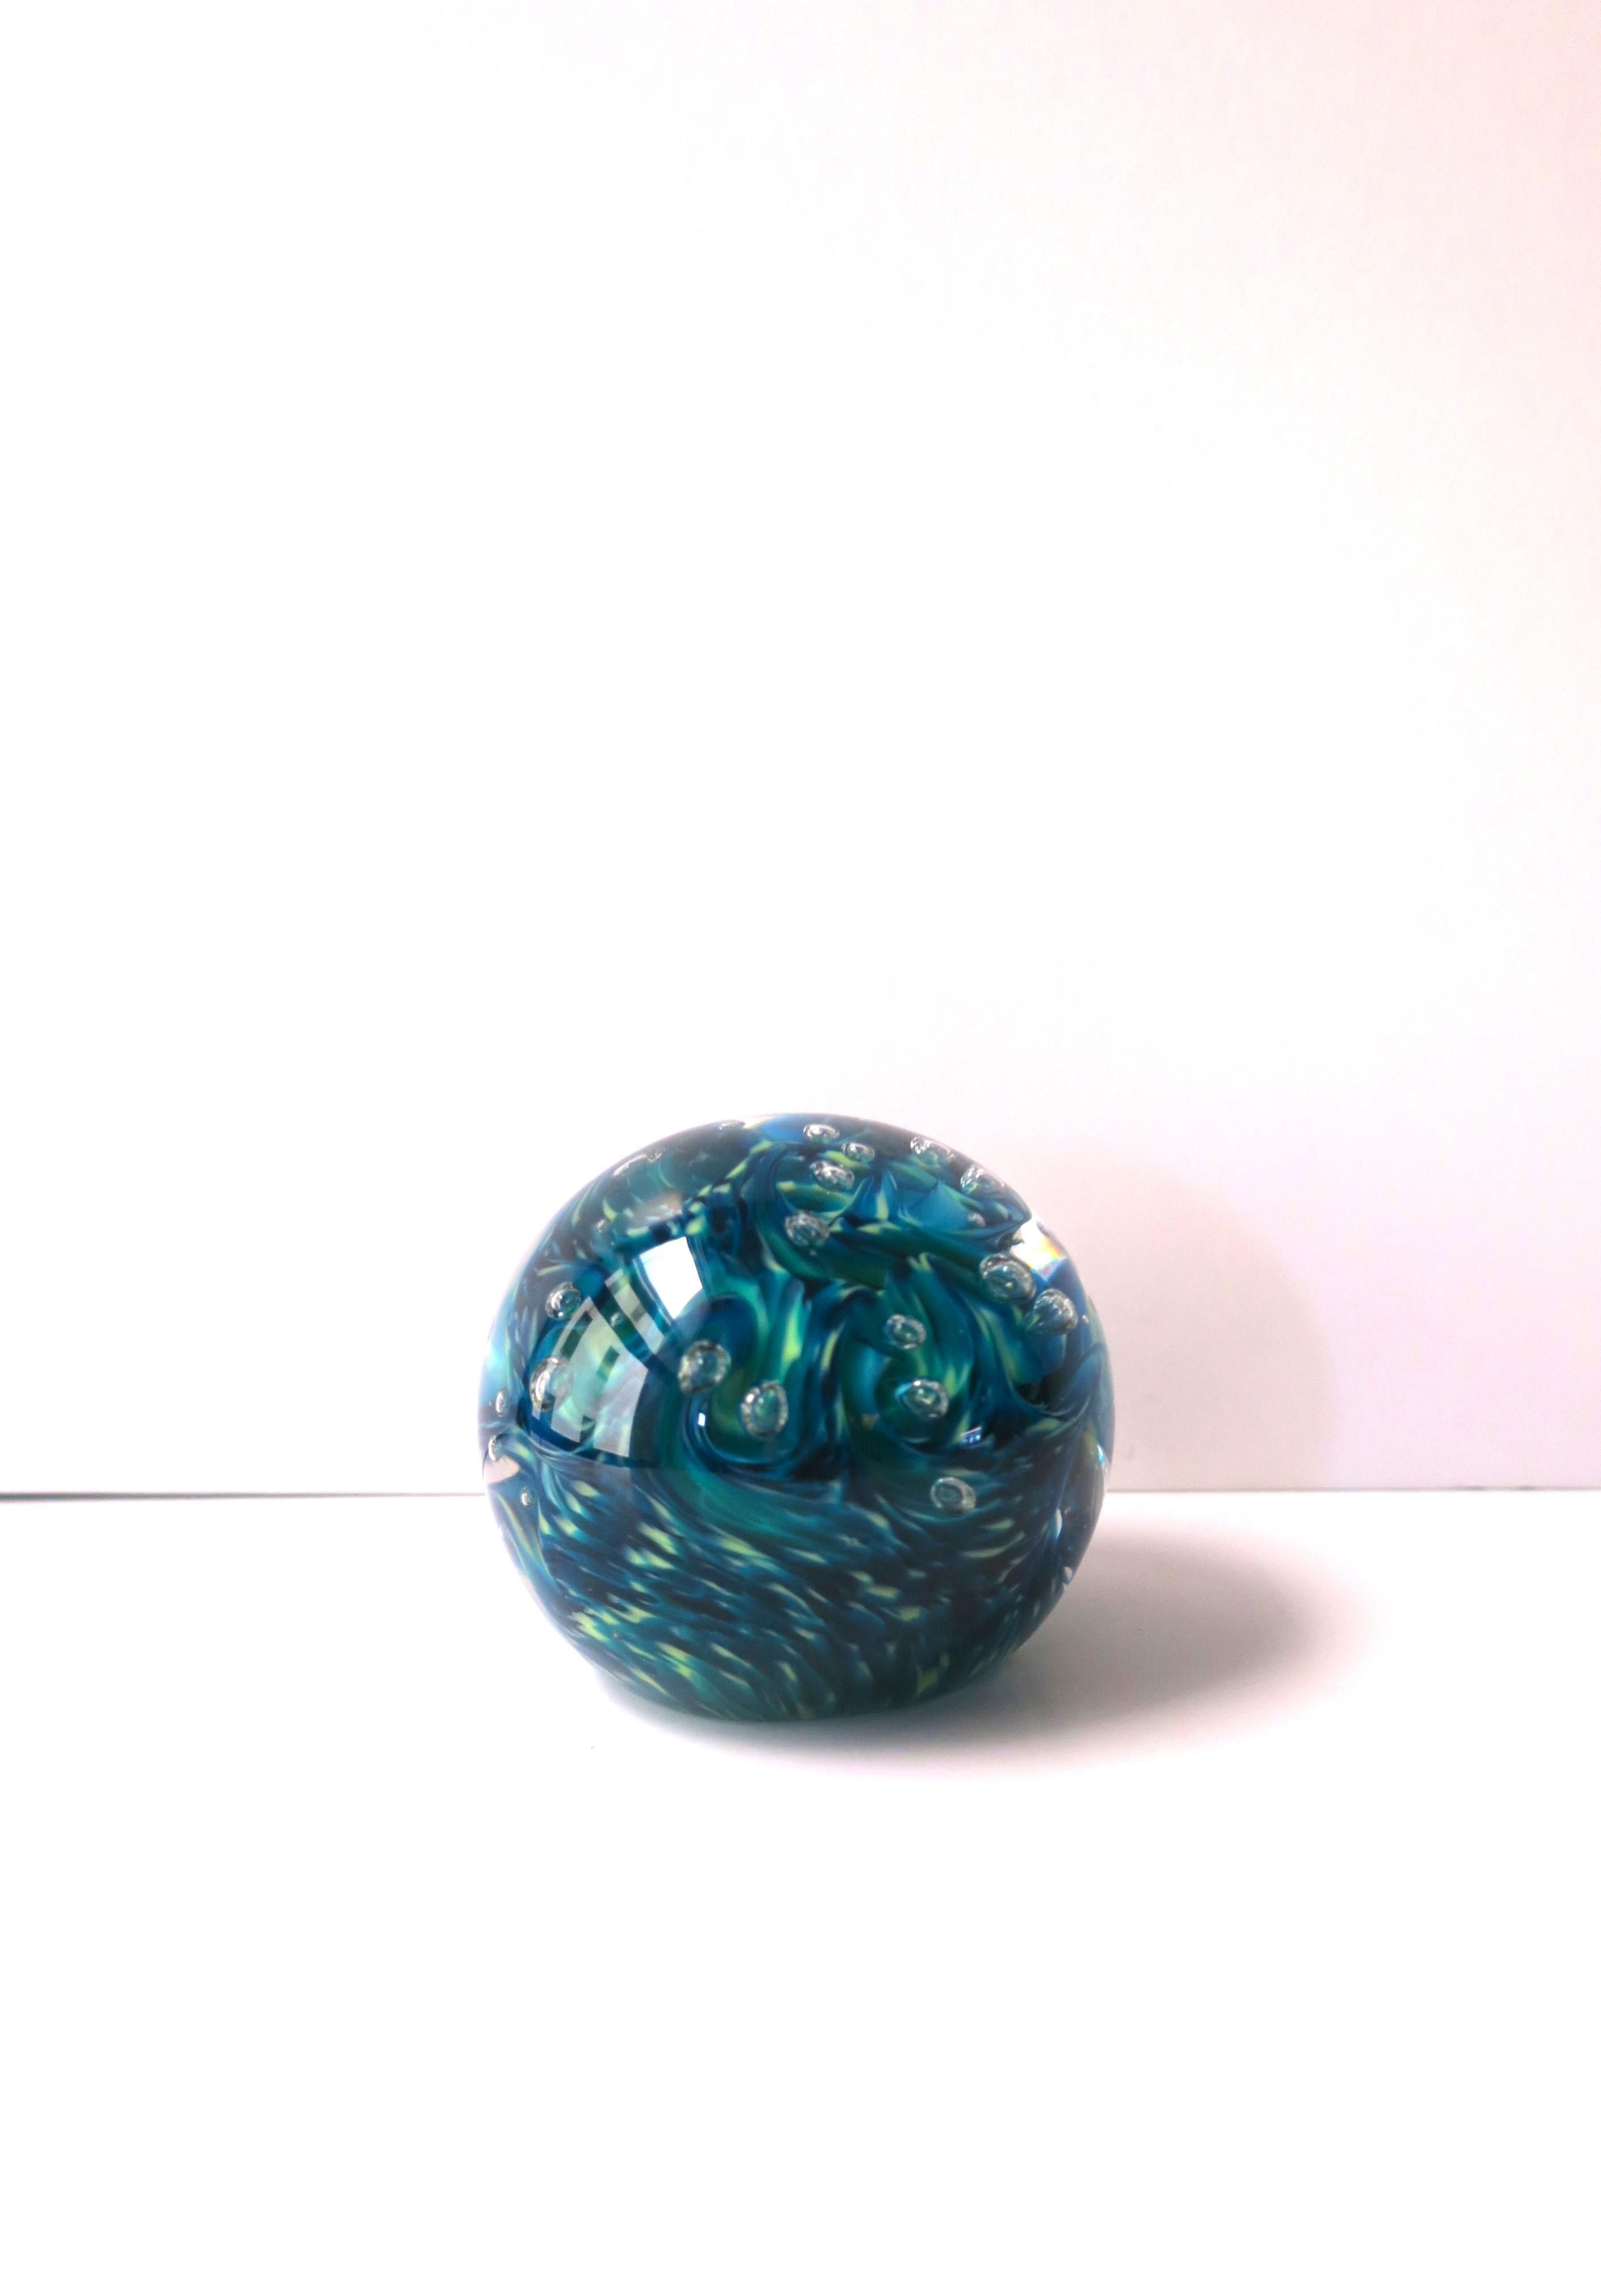 A substantial blue art glass ball sphere paperweight or decorative object with bubble design, signed by artist, 2021. A beautiful ball sphere paperweight with swirls of blue, green and shimmering art glass with bubble design, hand-made by artist